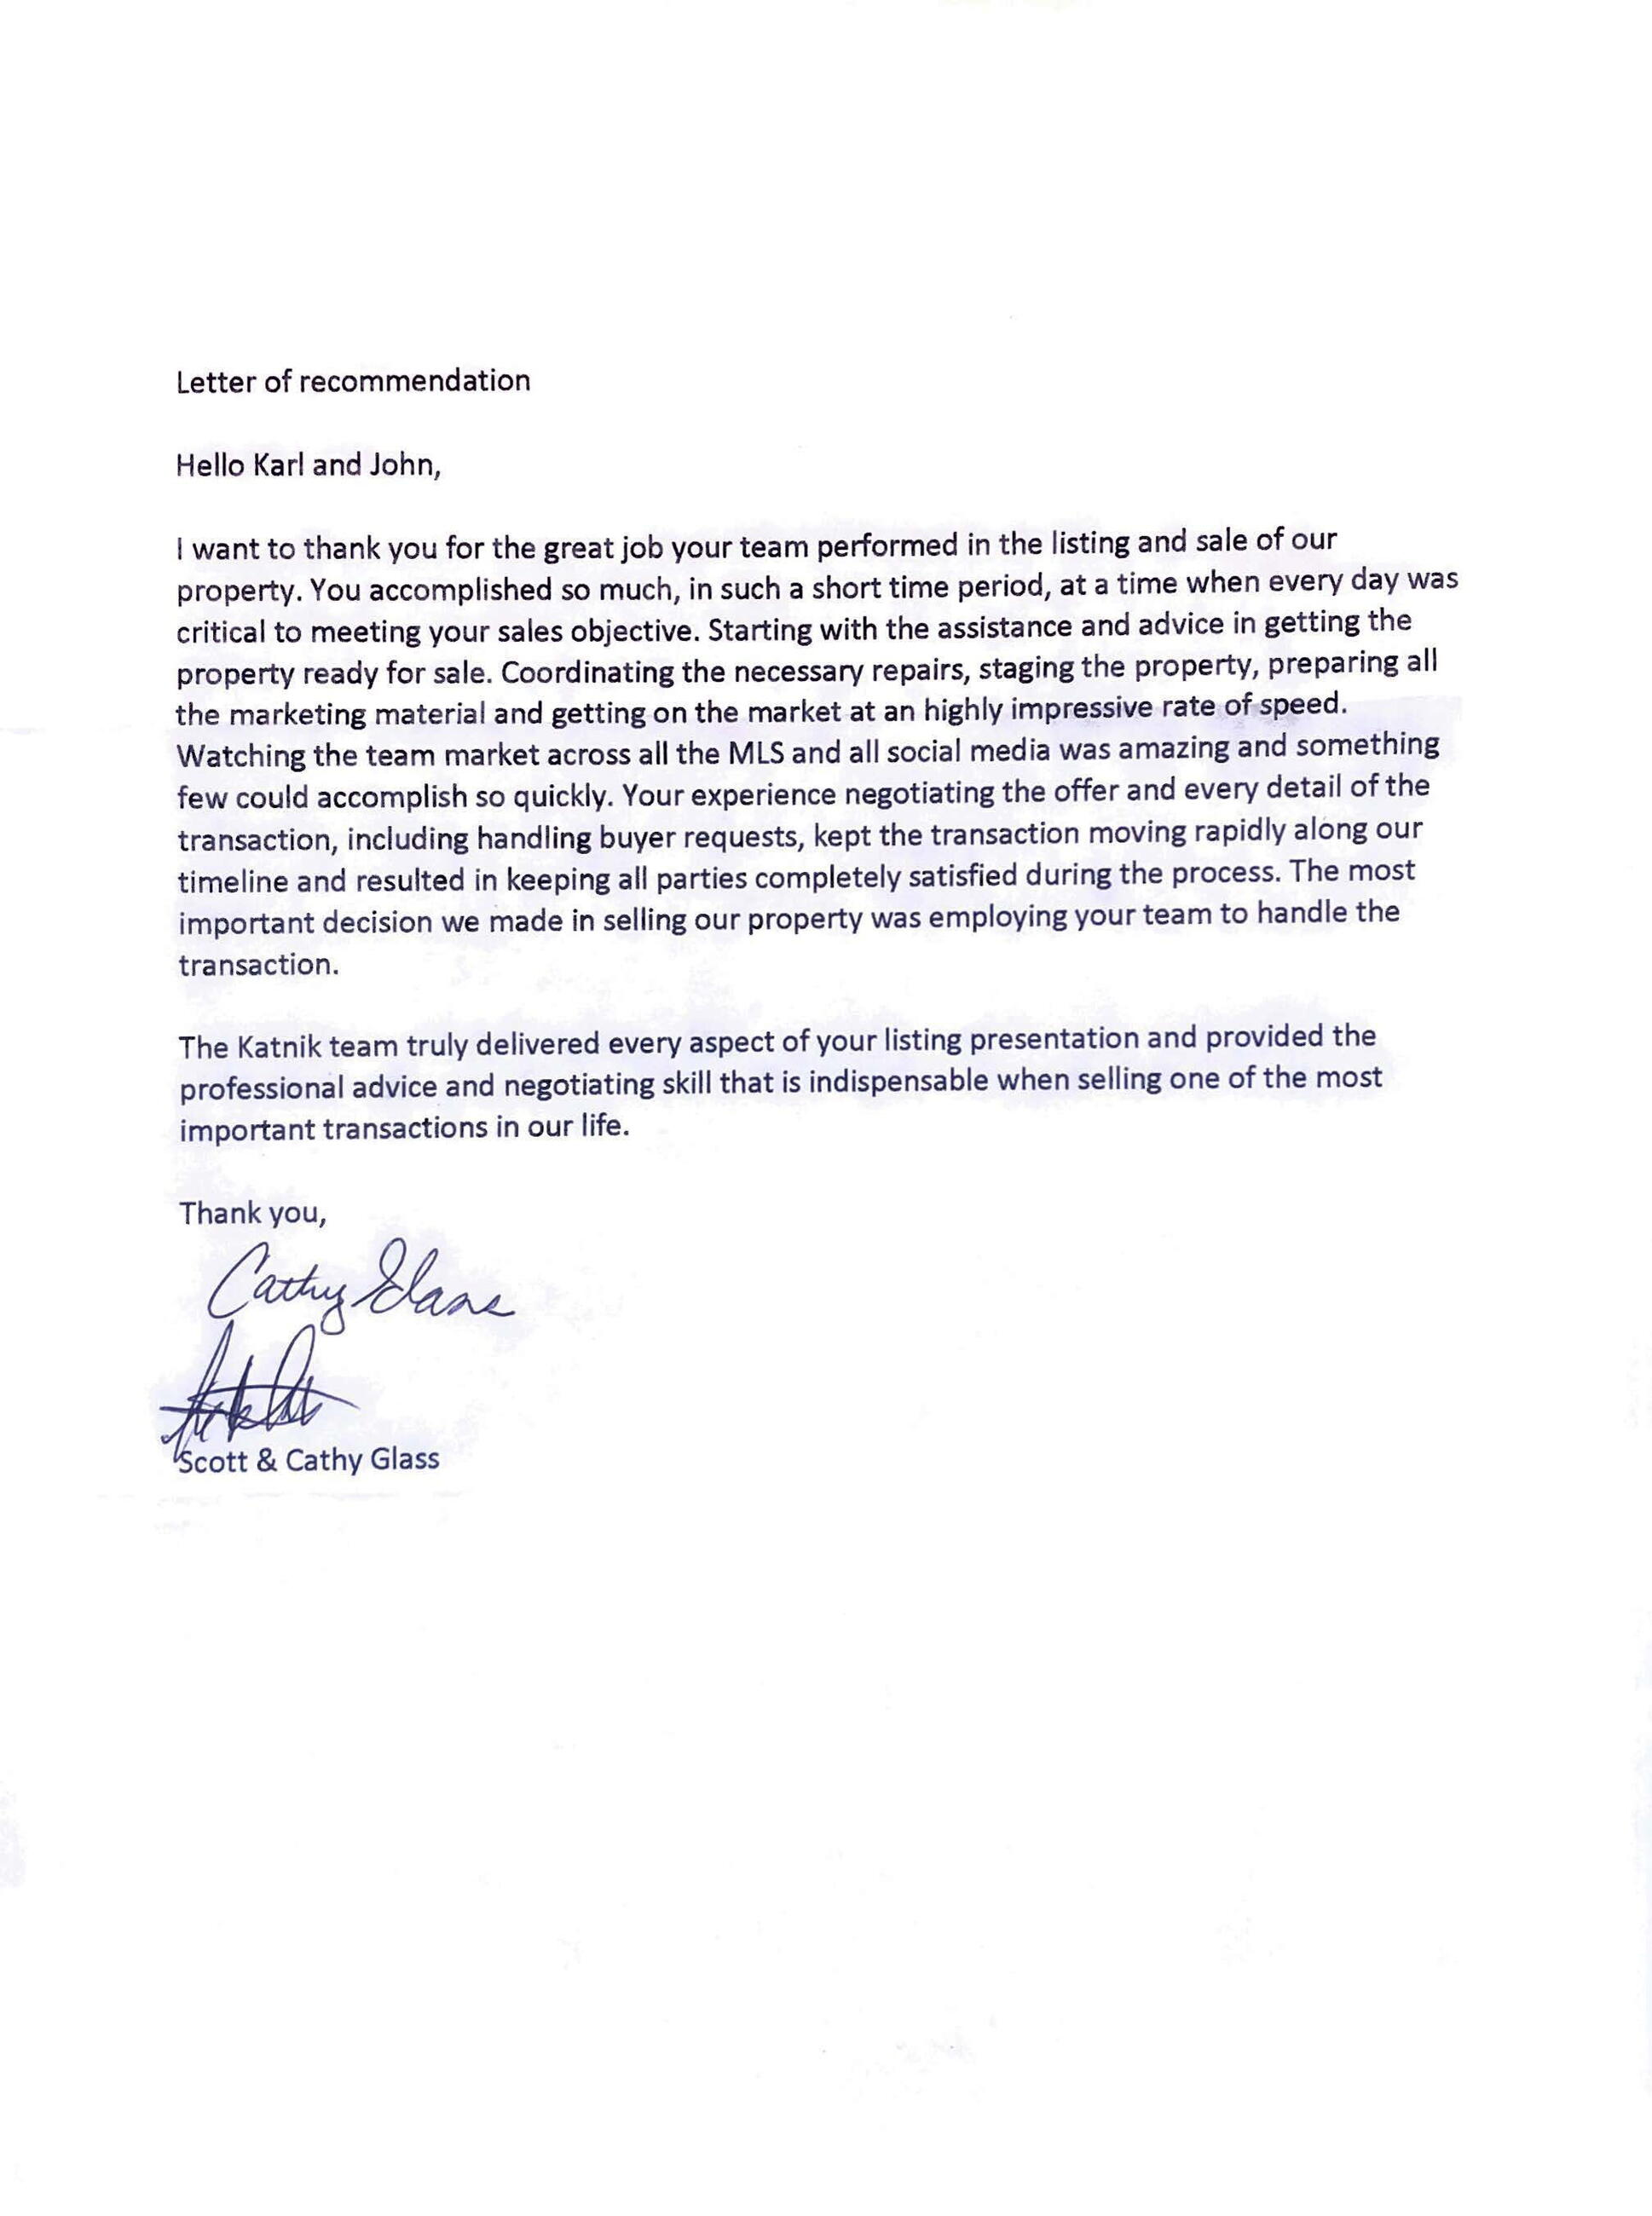 Scott and Cathy Glass Letter